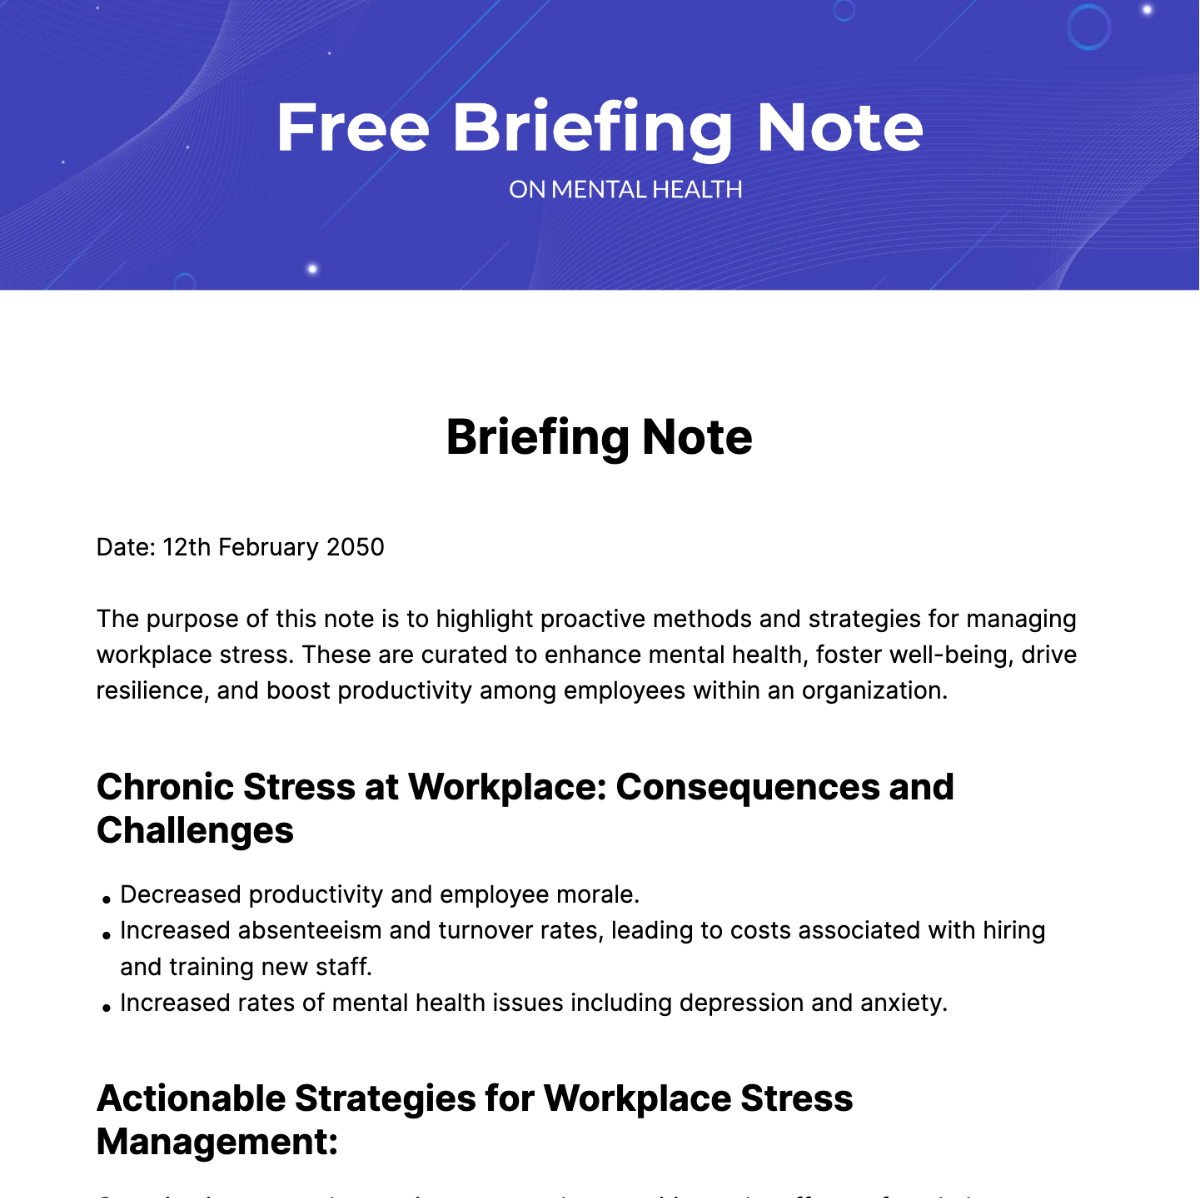 Briefing Note on Mental Health Template